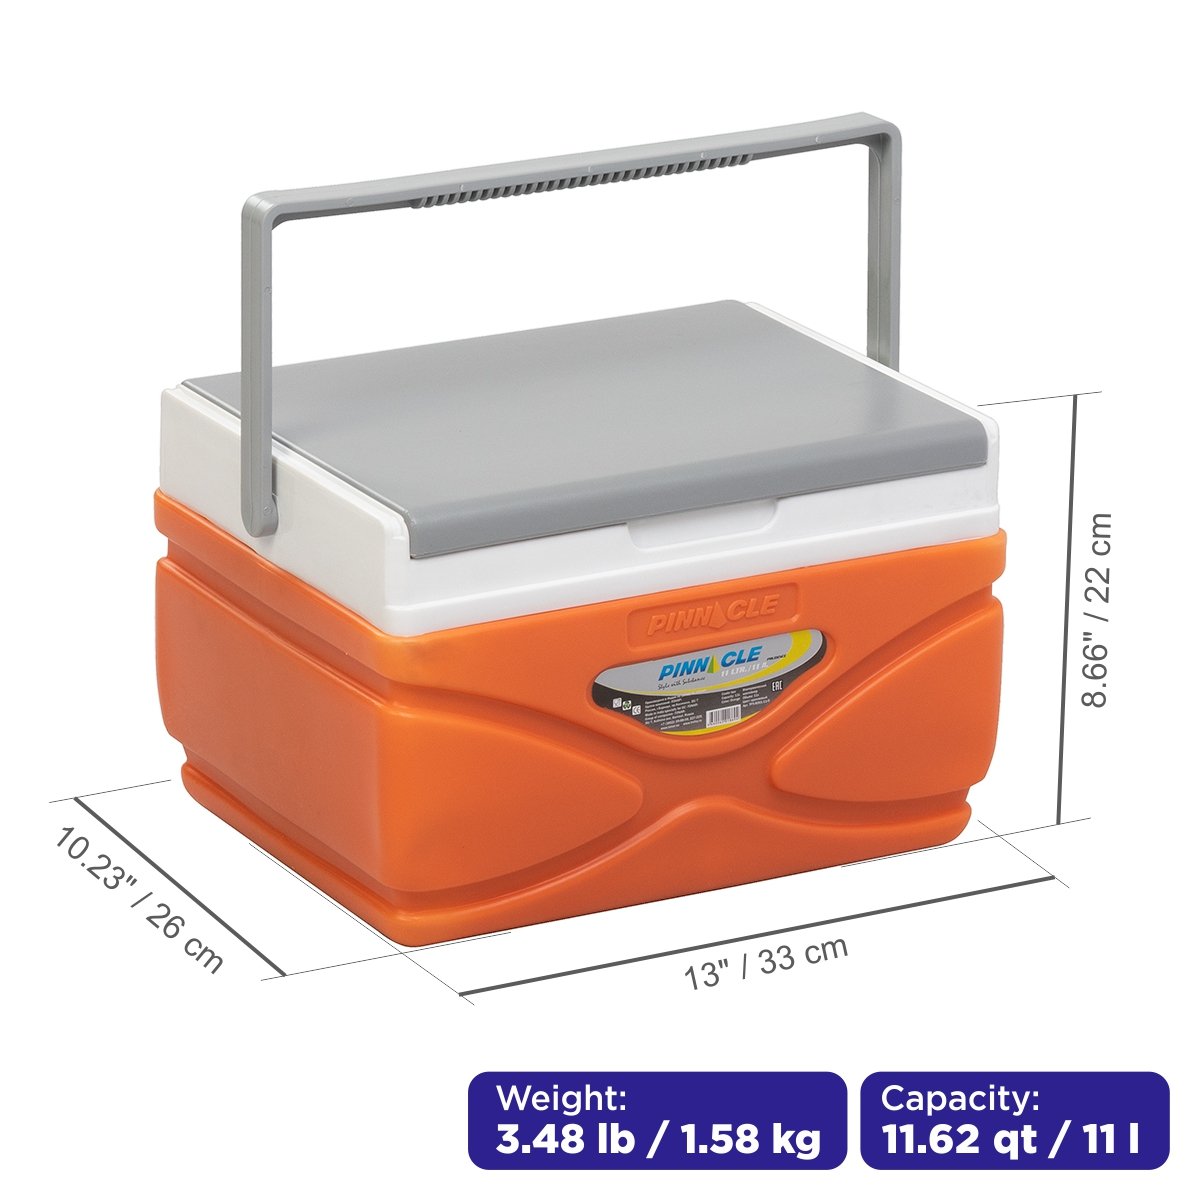 Prudence Portable Hard-Sided Ice Chest for Camping, 11 qt, with handle, orange color weighs 3.5 lbs and is 13 inches long, 10 inches wide and 8.6 inches high